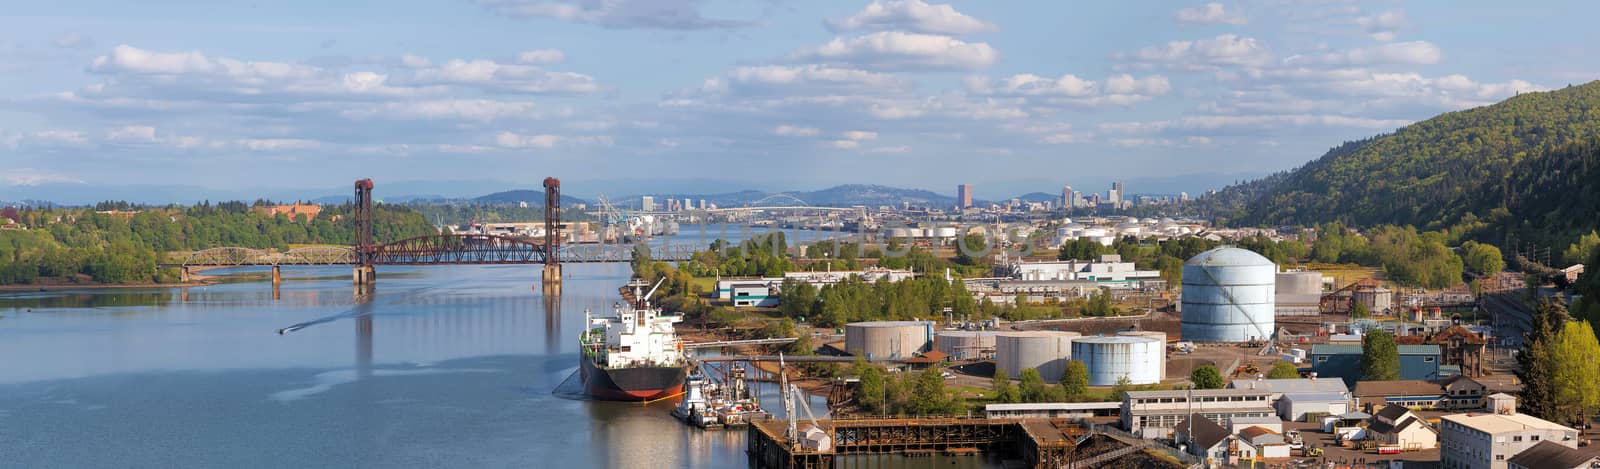 Portland Oregon Shipbuilding and Repair Shipyard Along Willamette River by St Johns Area with City and Swan Island View Panorama